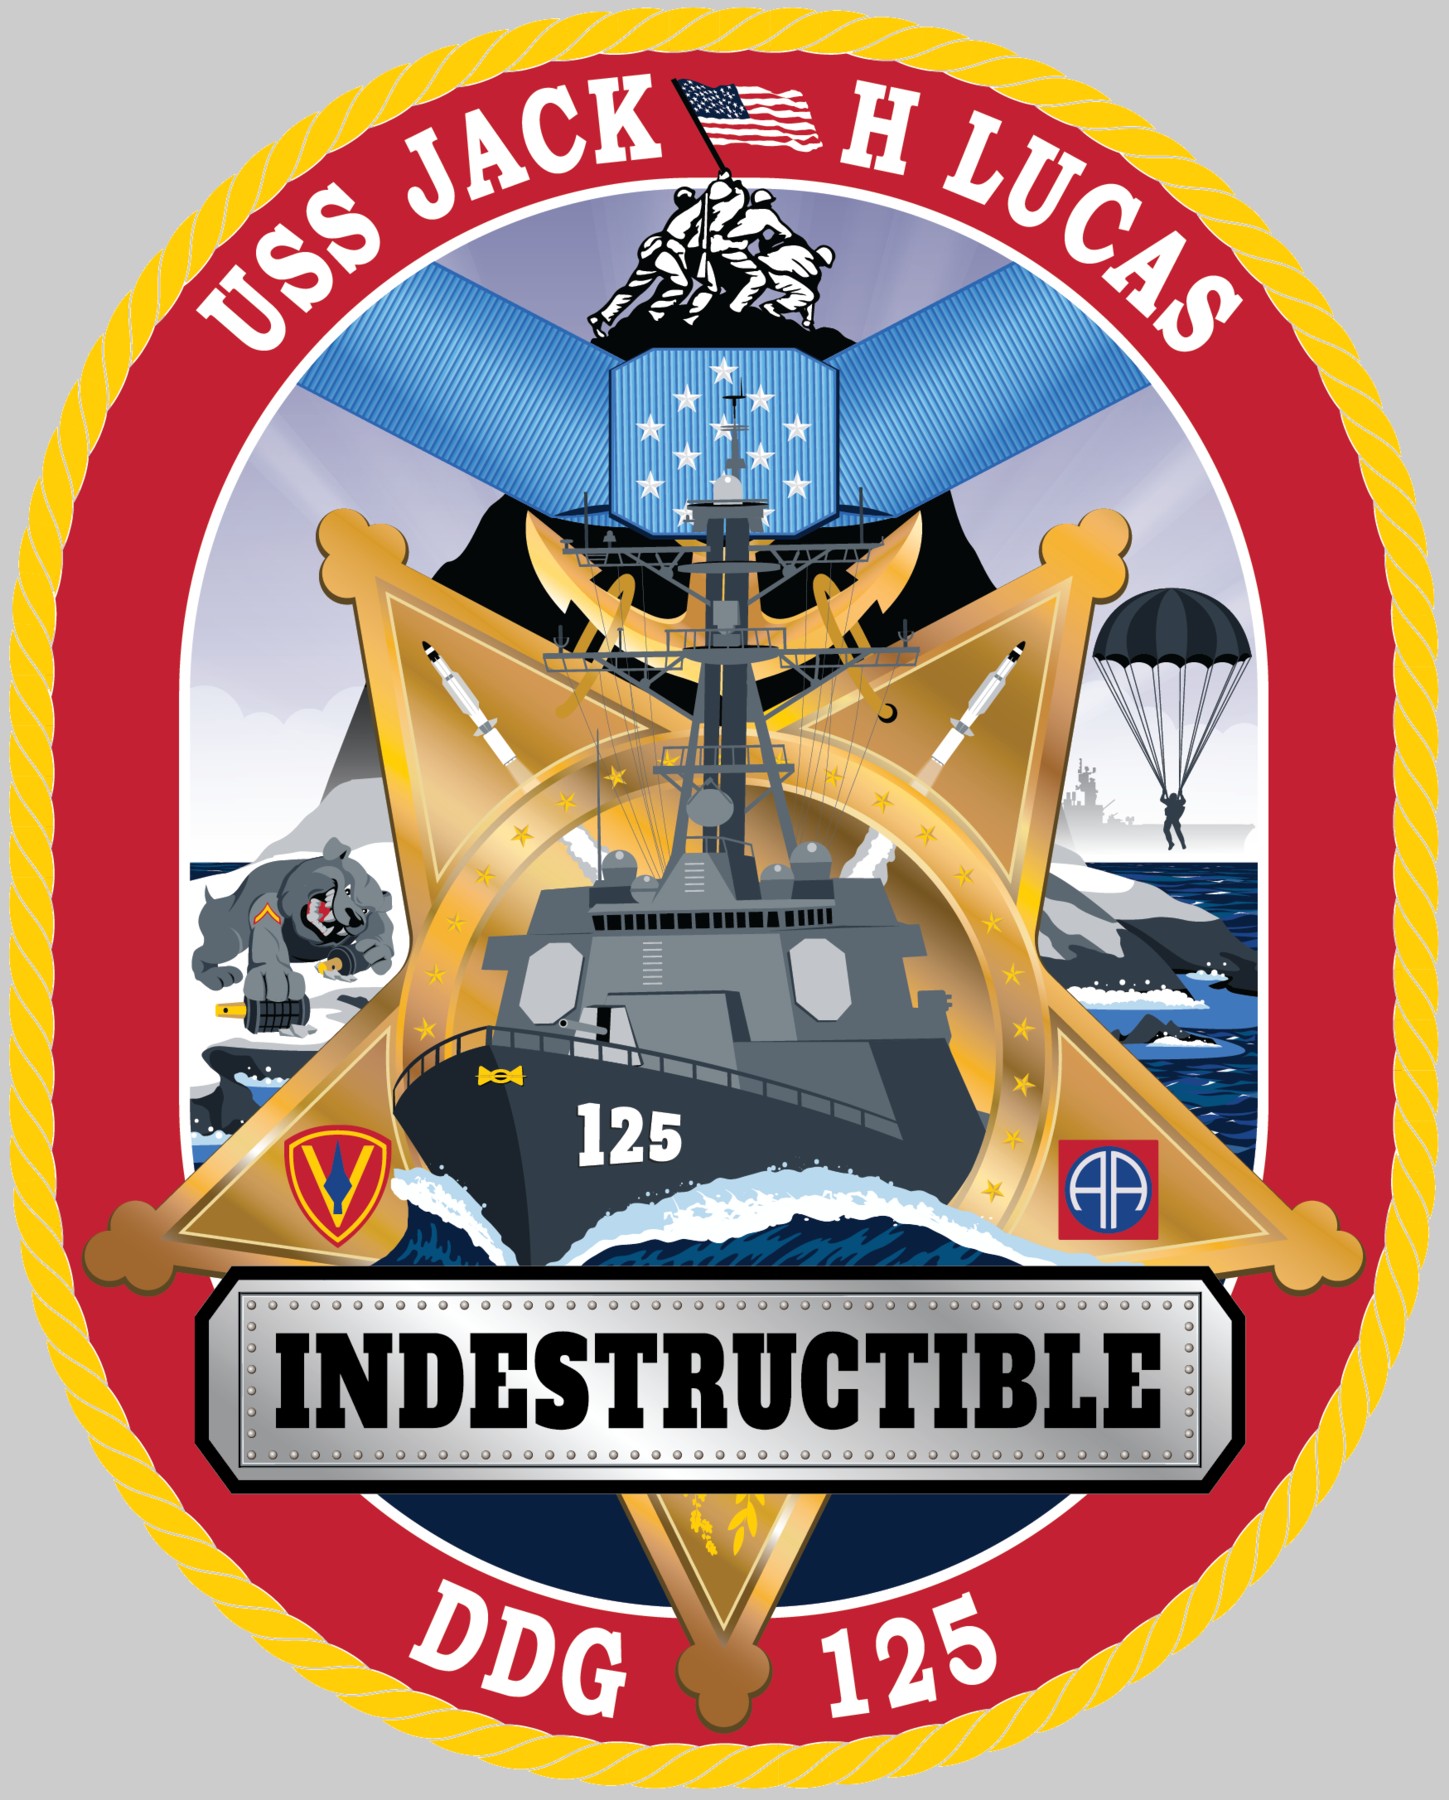 ddg-125 uss jack h. lucas insignia crest patch badge arleigh burke class guided missile destroyer us navy 02x